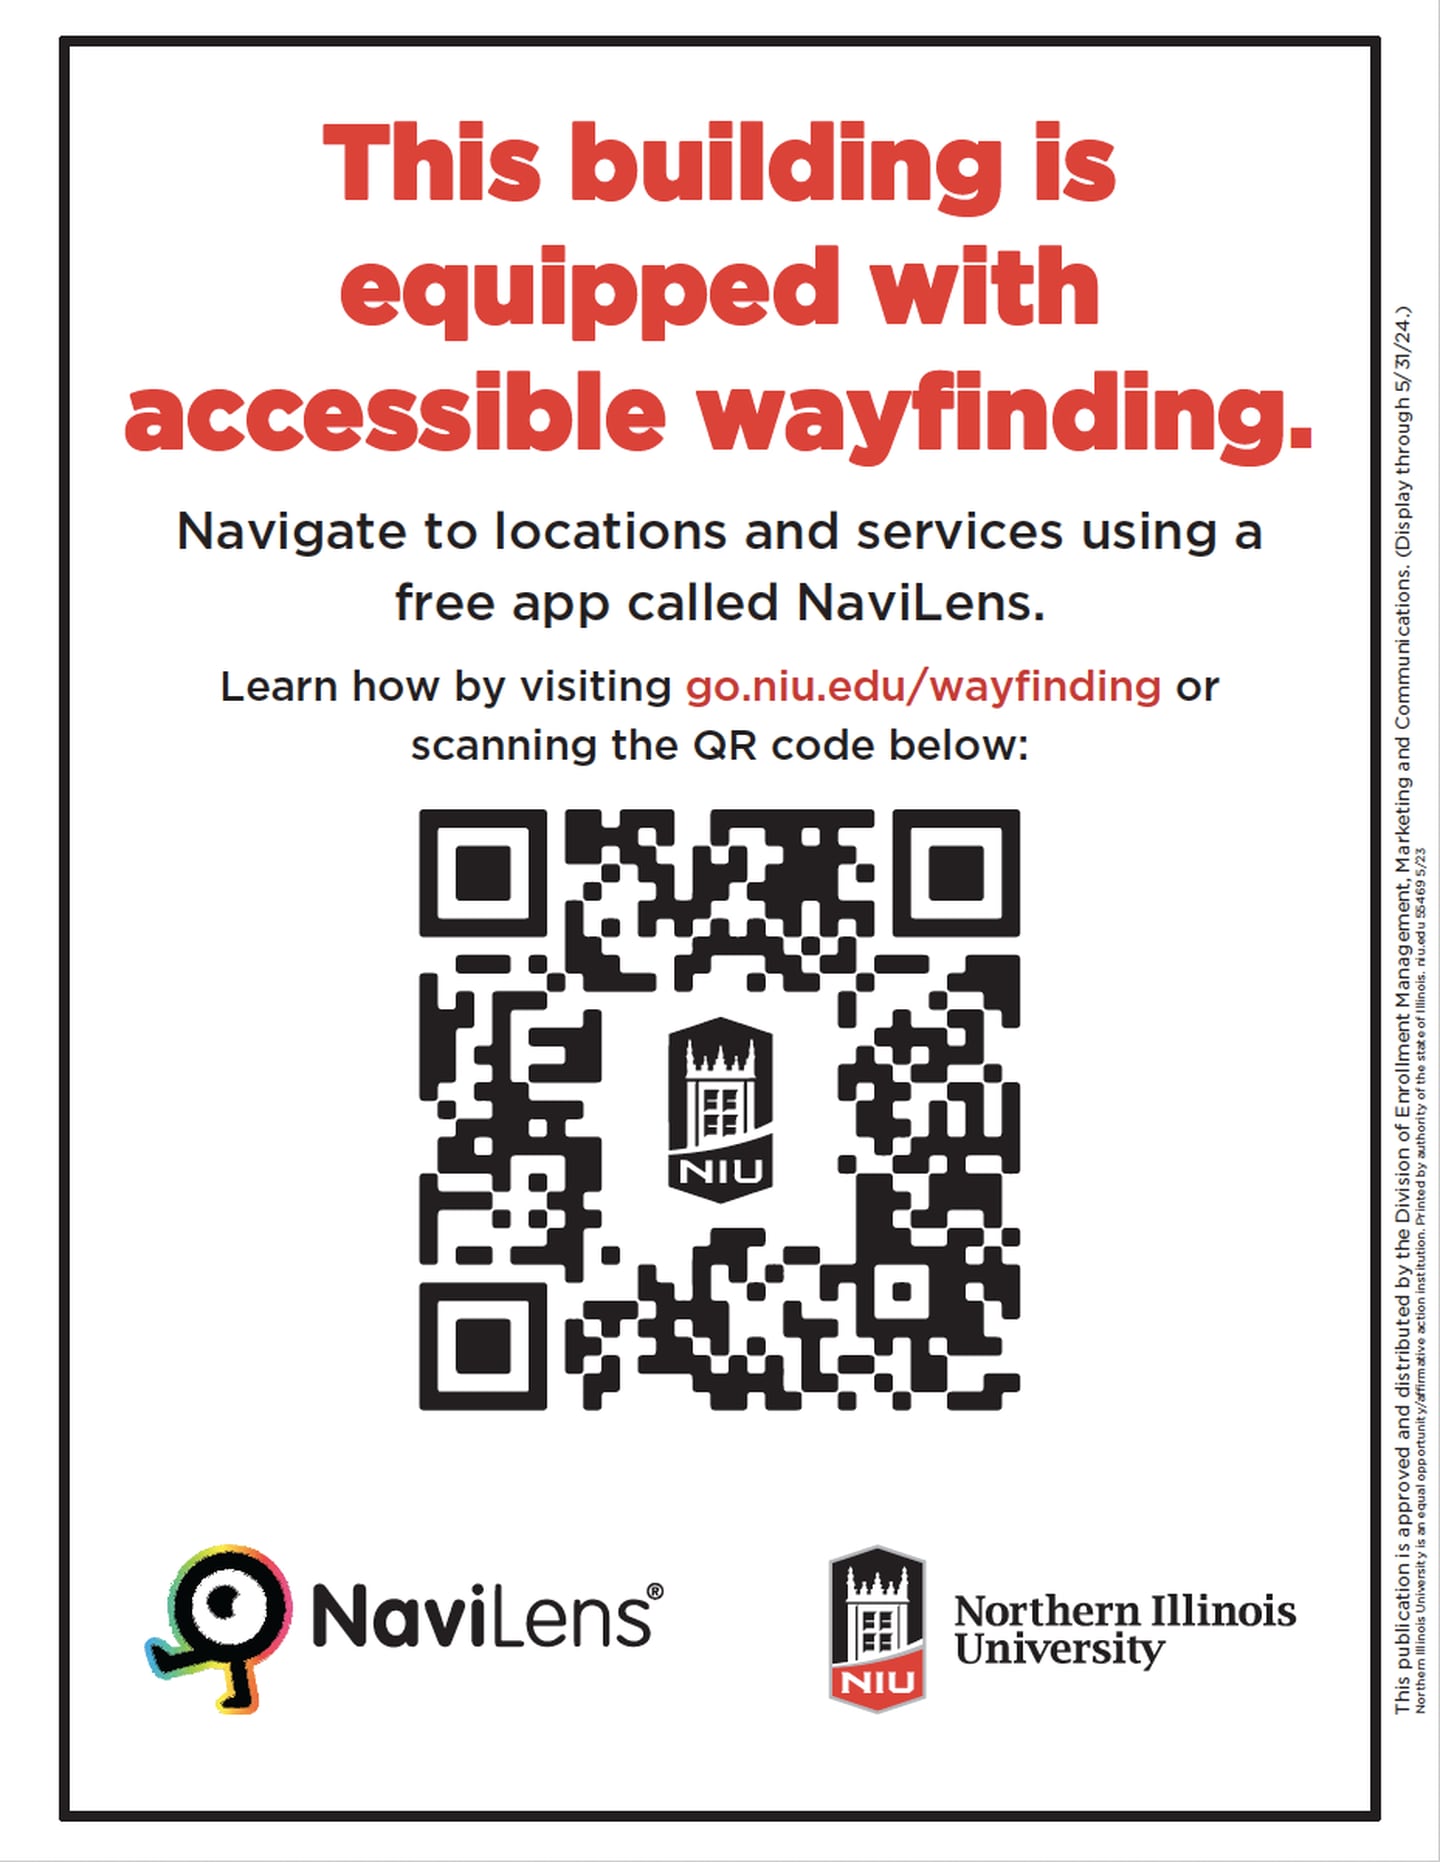 Northern Illinois University has partnered with NaviLens to help those with disabilities navigate across campus.